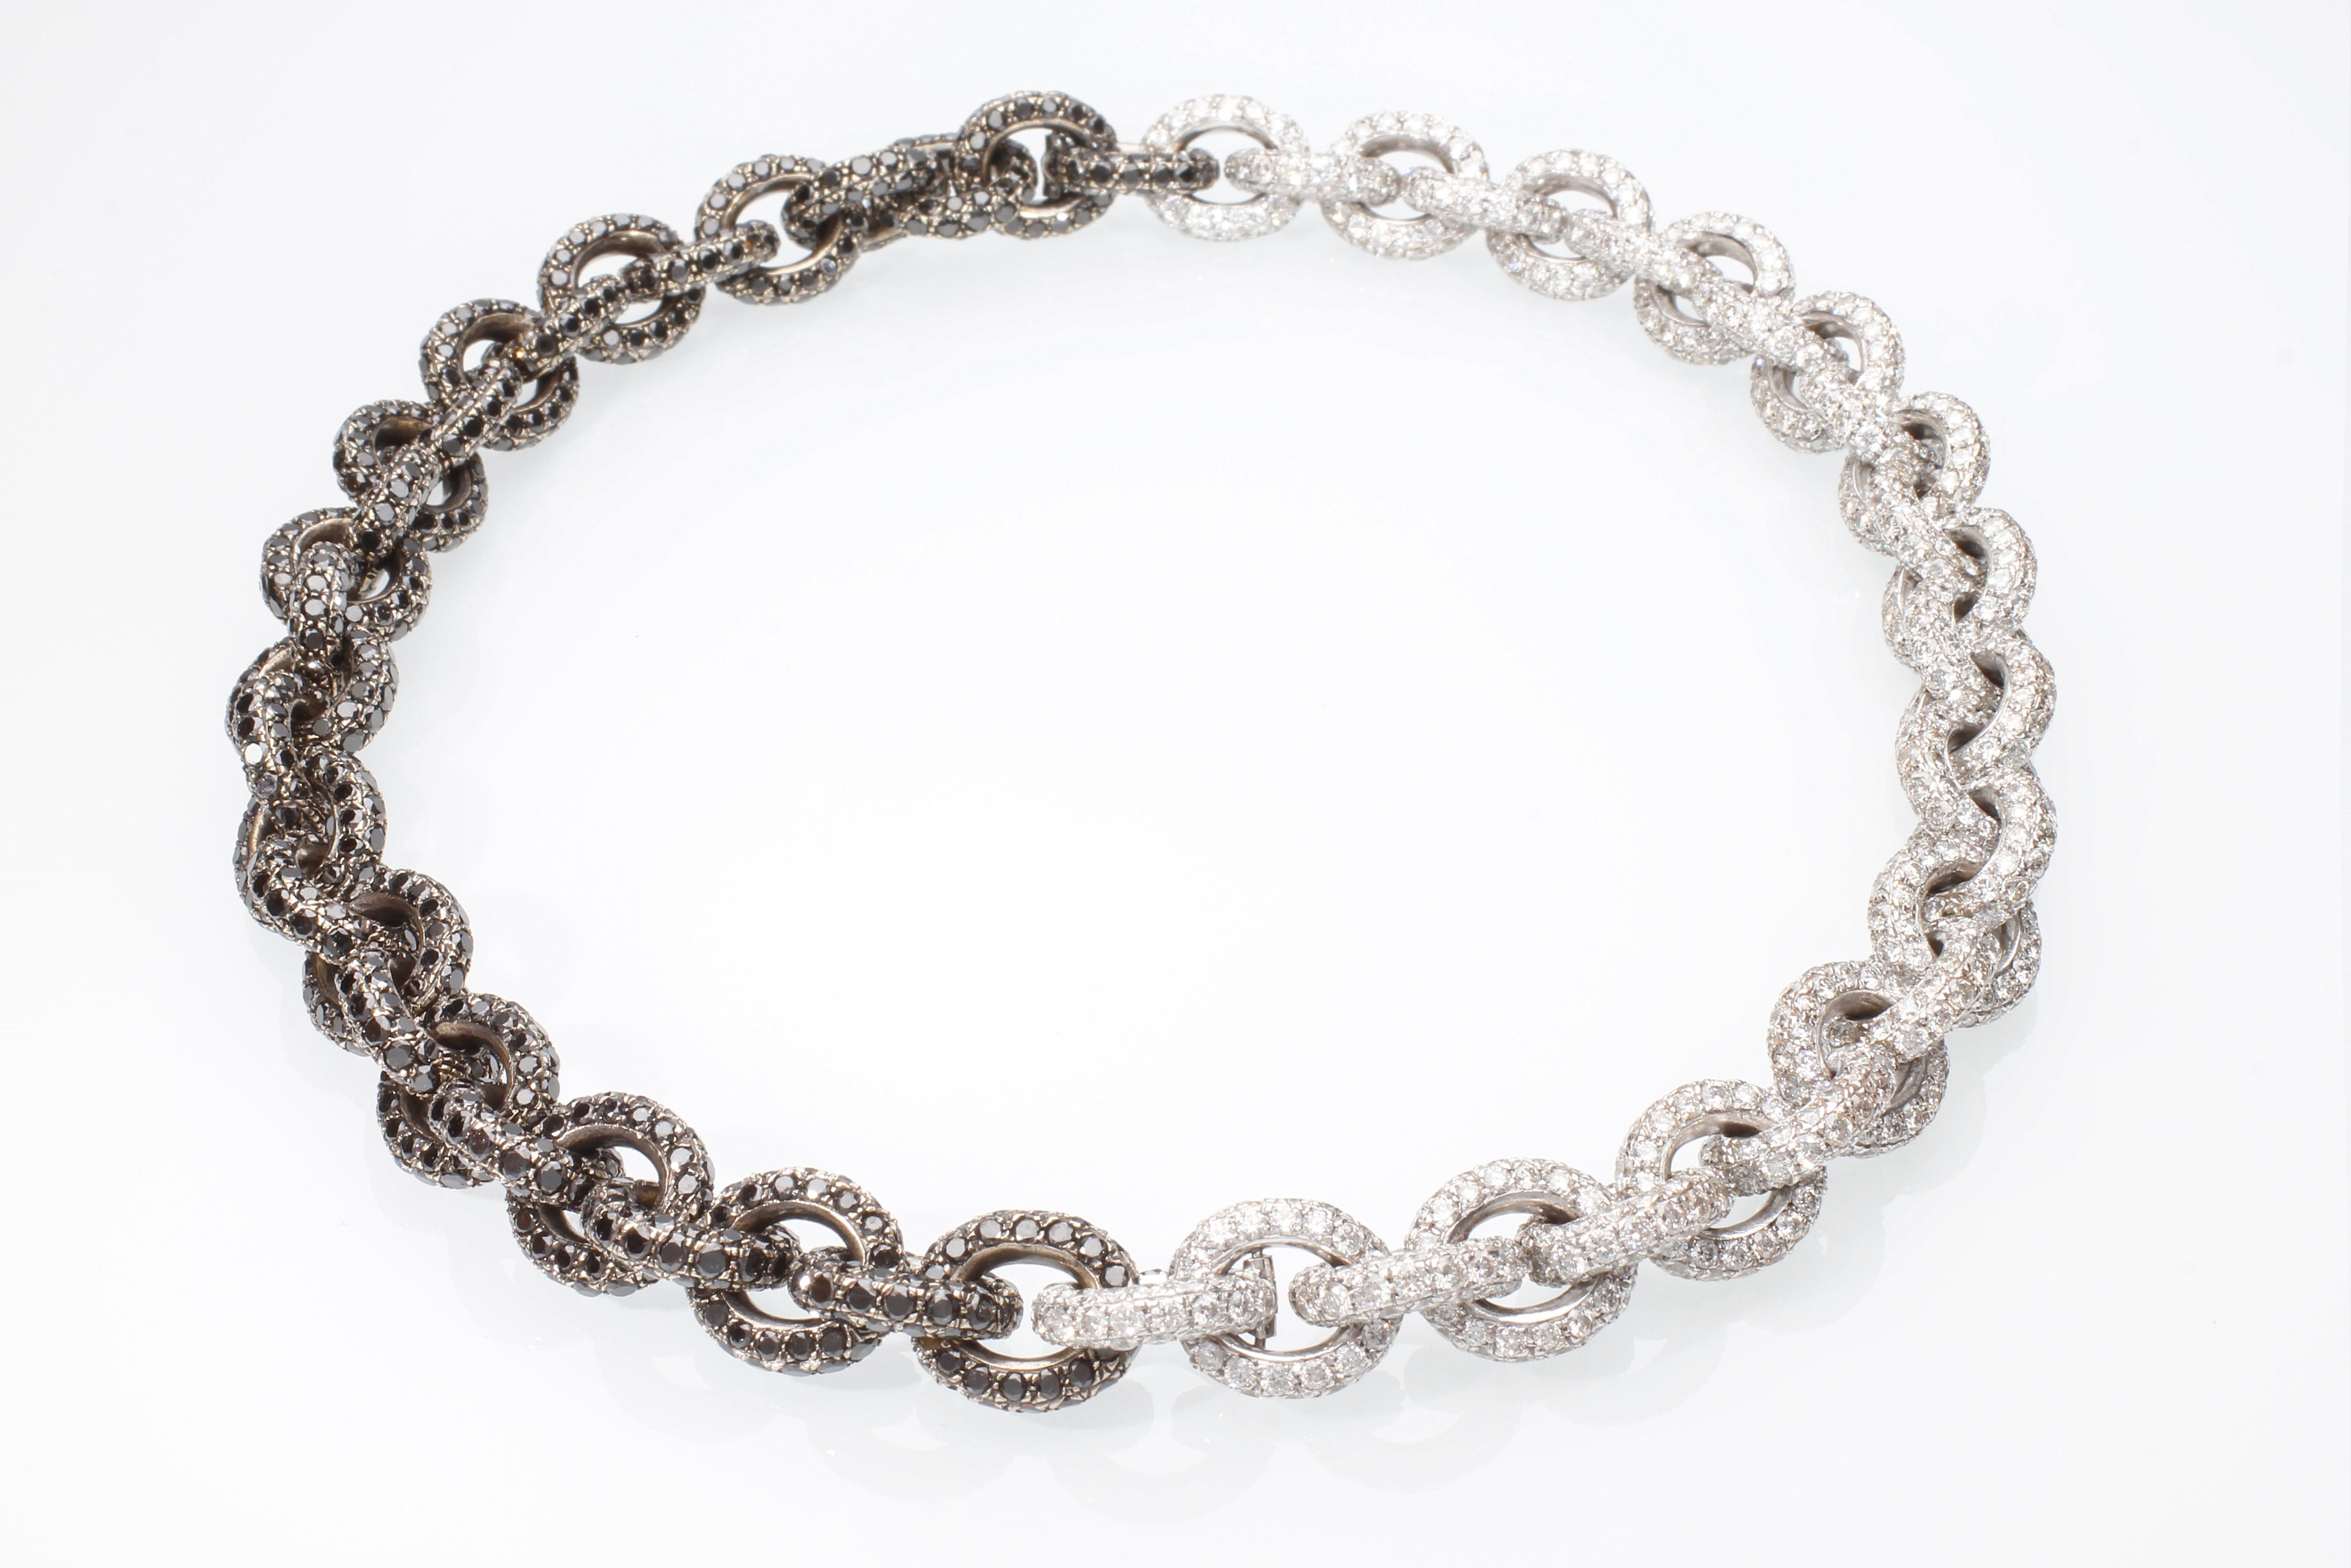 Chain Bracelet with 30.76 Ct of White Diamonds. Handmade. Made in Italy For Sale 8